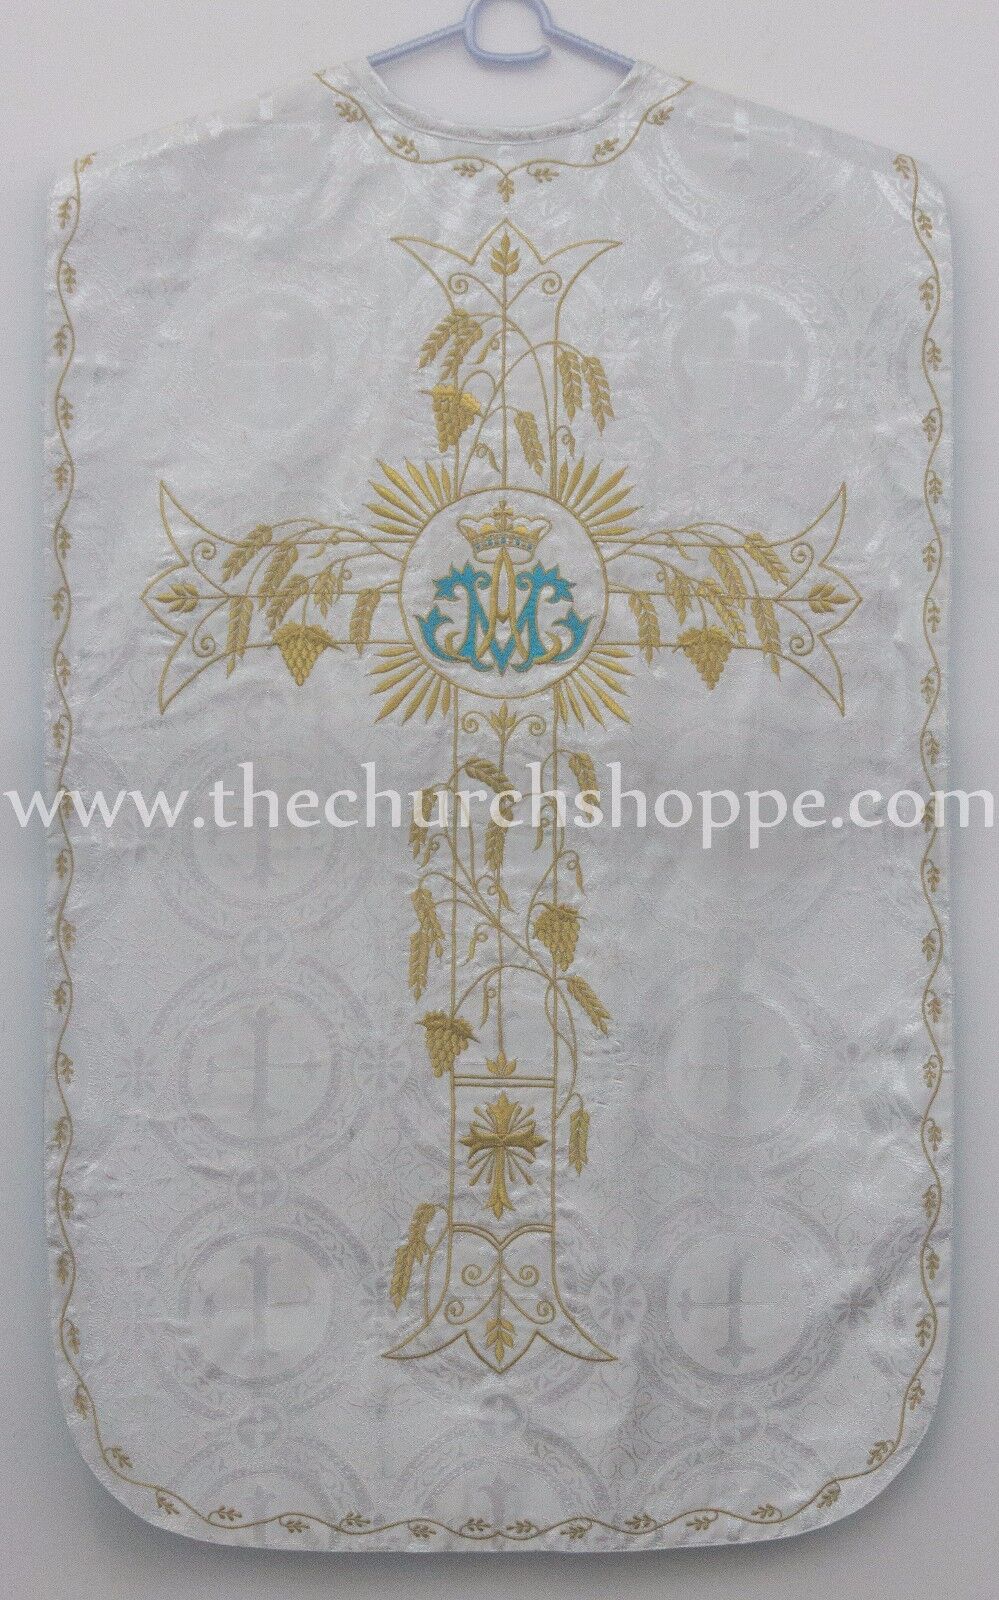 Silver Marian Blue Roman Chasuble Fiddleback Vestment 5pc mass set AM embroidery